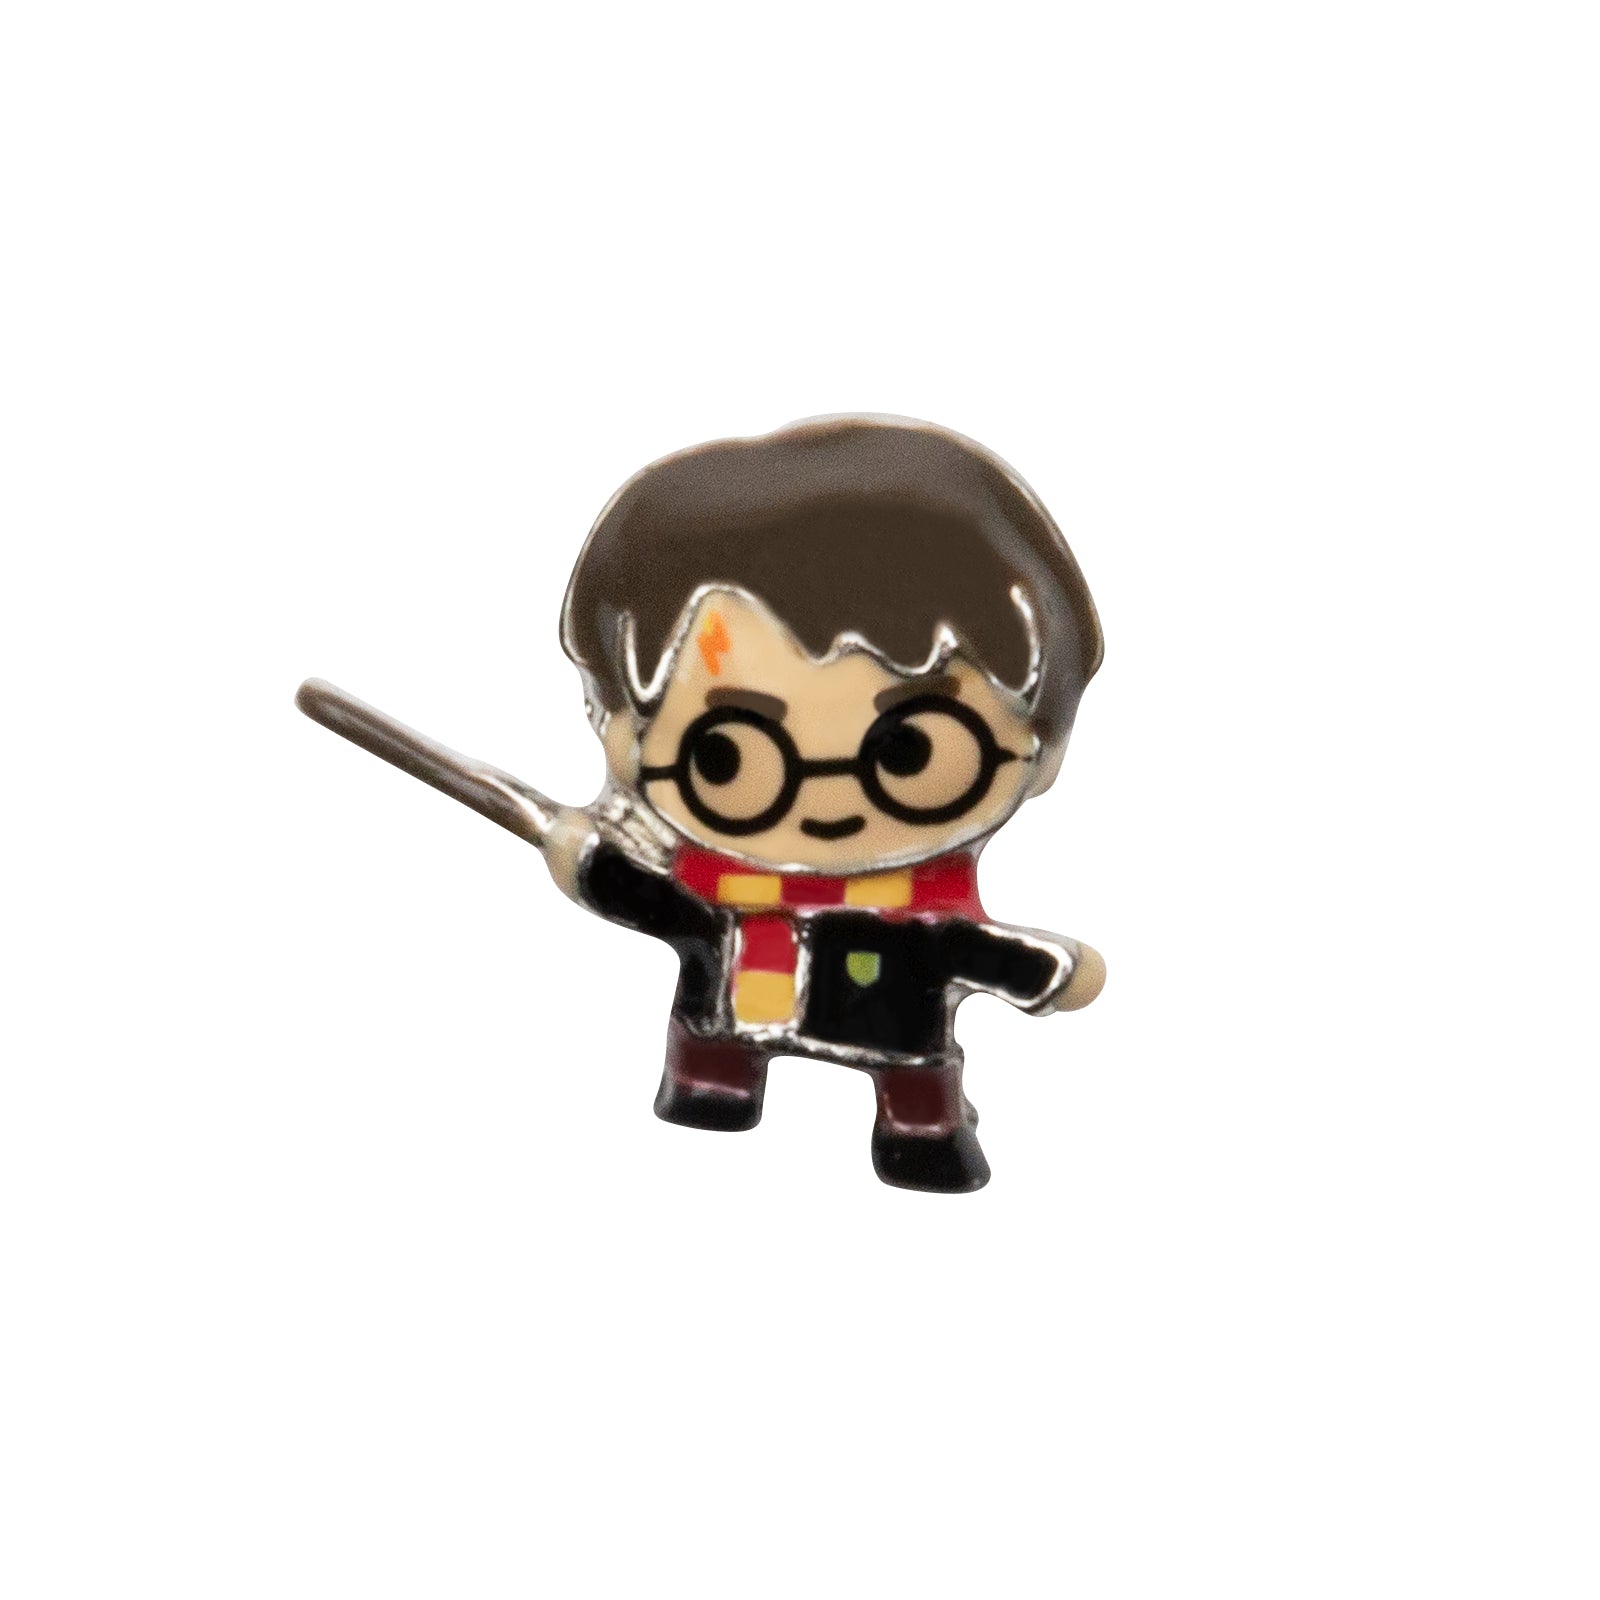 Think Goodness in 2023  Harry potter charms, Harry potter jewelry